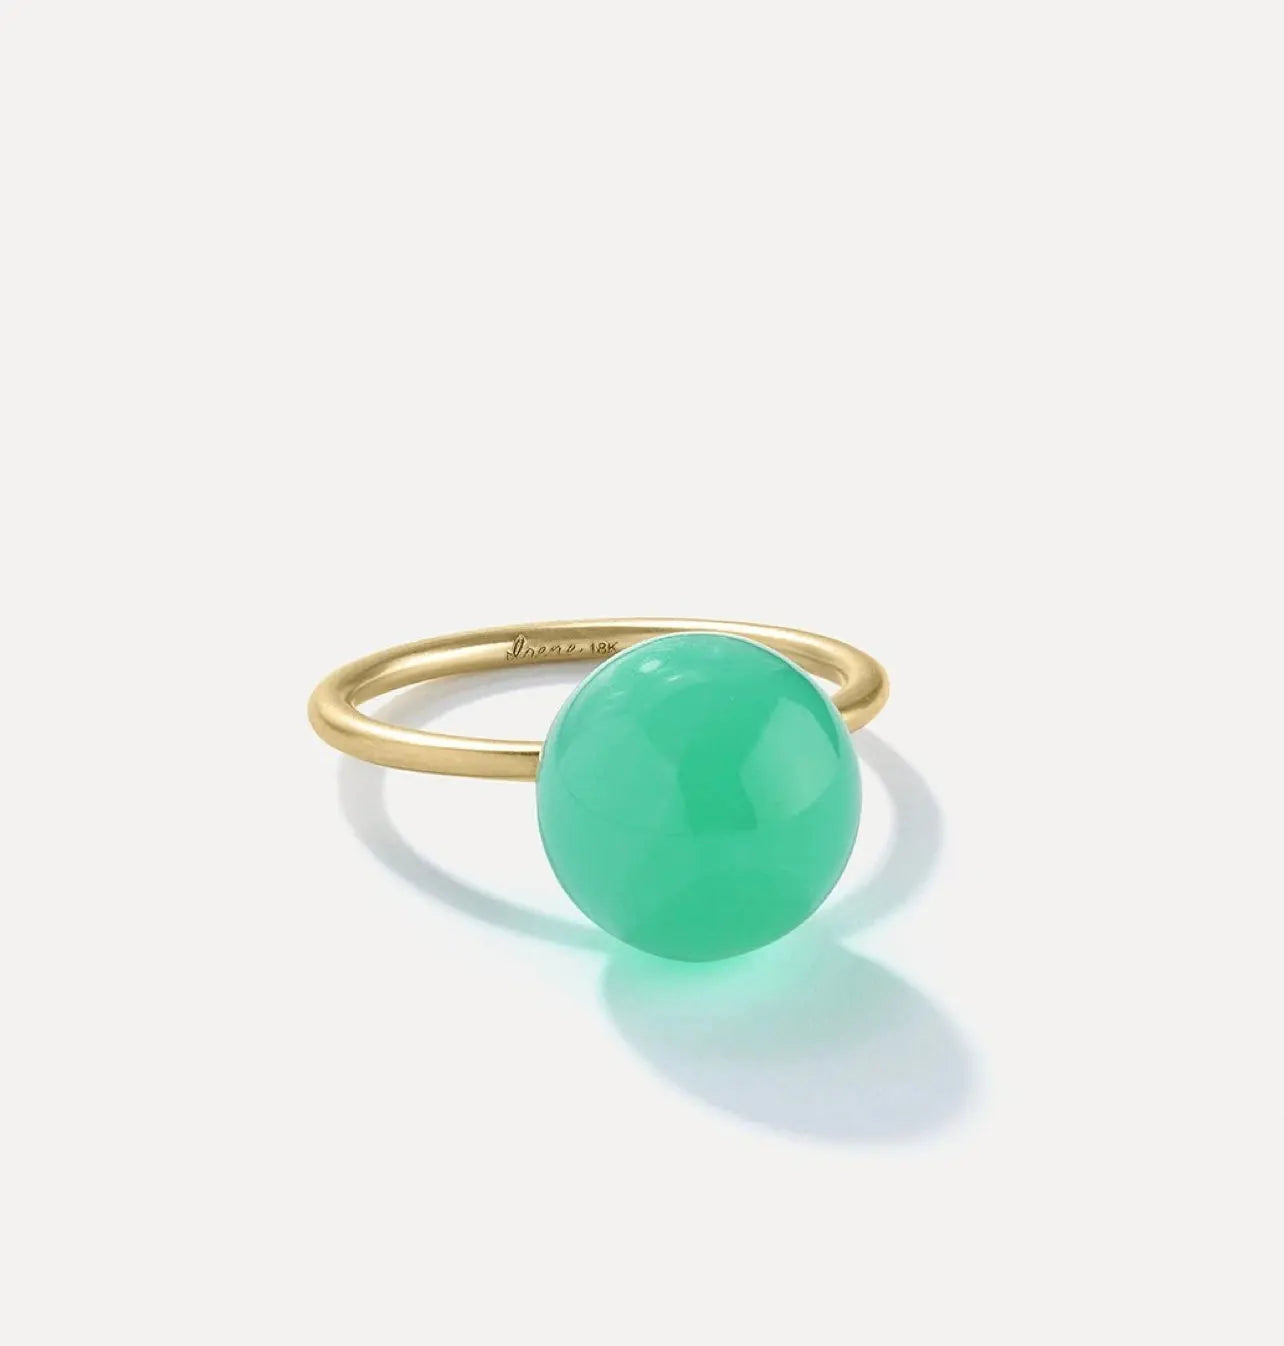 Large Gumball Ring in Chrysoprase - Squash Blossom Vail